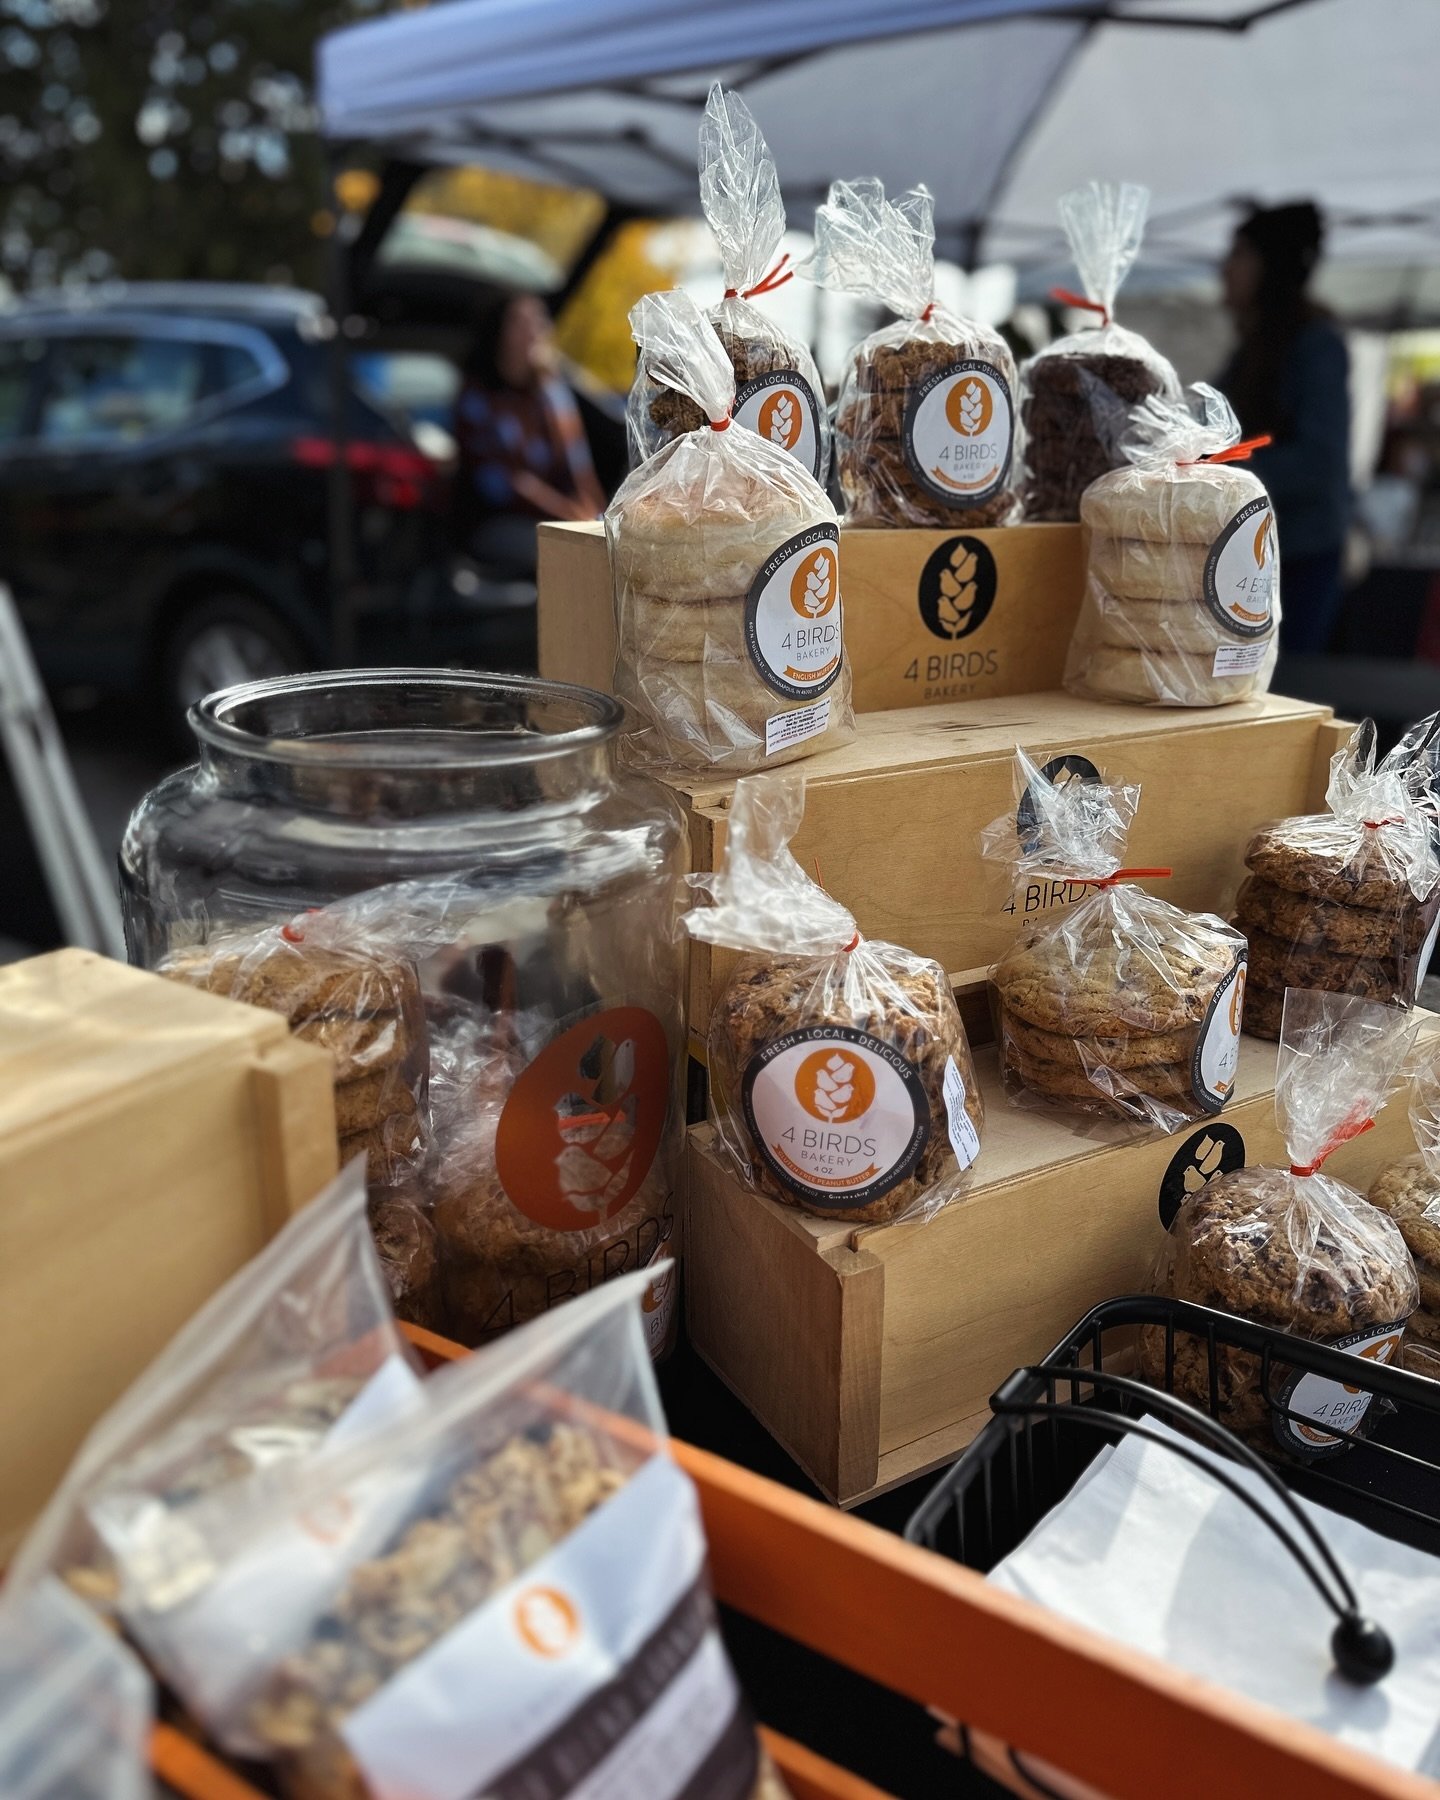 The first summer market of the season tomorrow @garfieldparkfarmersmarket 🙌

Stop by our booth for our breakfast sandwiches made by chef @stevenunrue and all of your @4birdsbakery favorites 🍪

We&rsquo;ll also have our gluten-free peanut butter ban